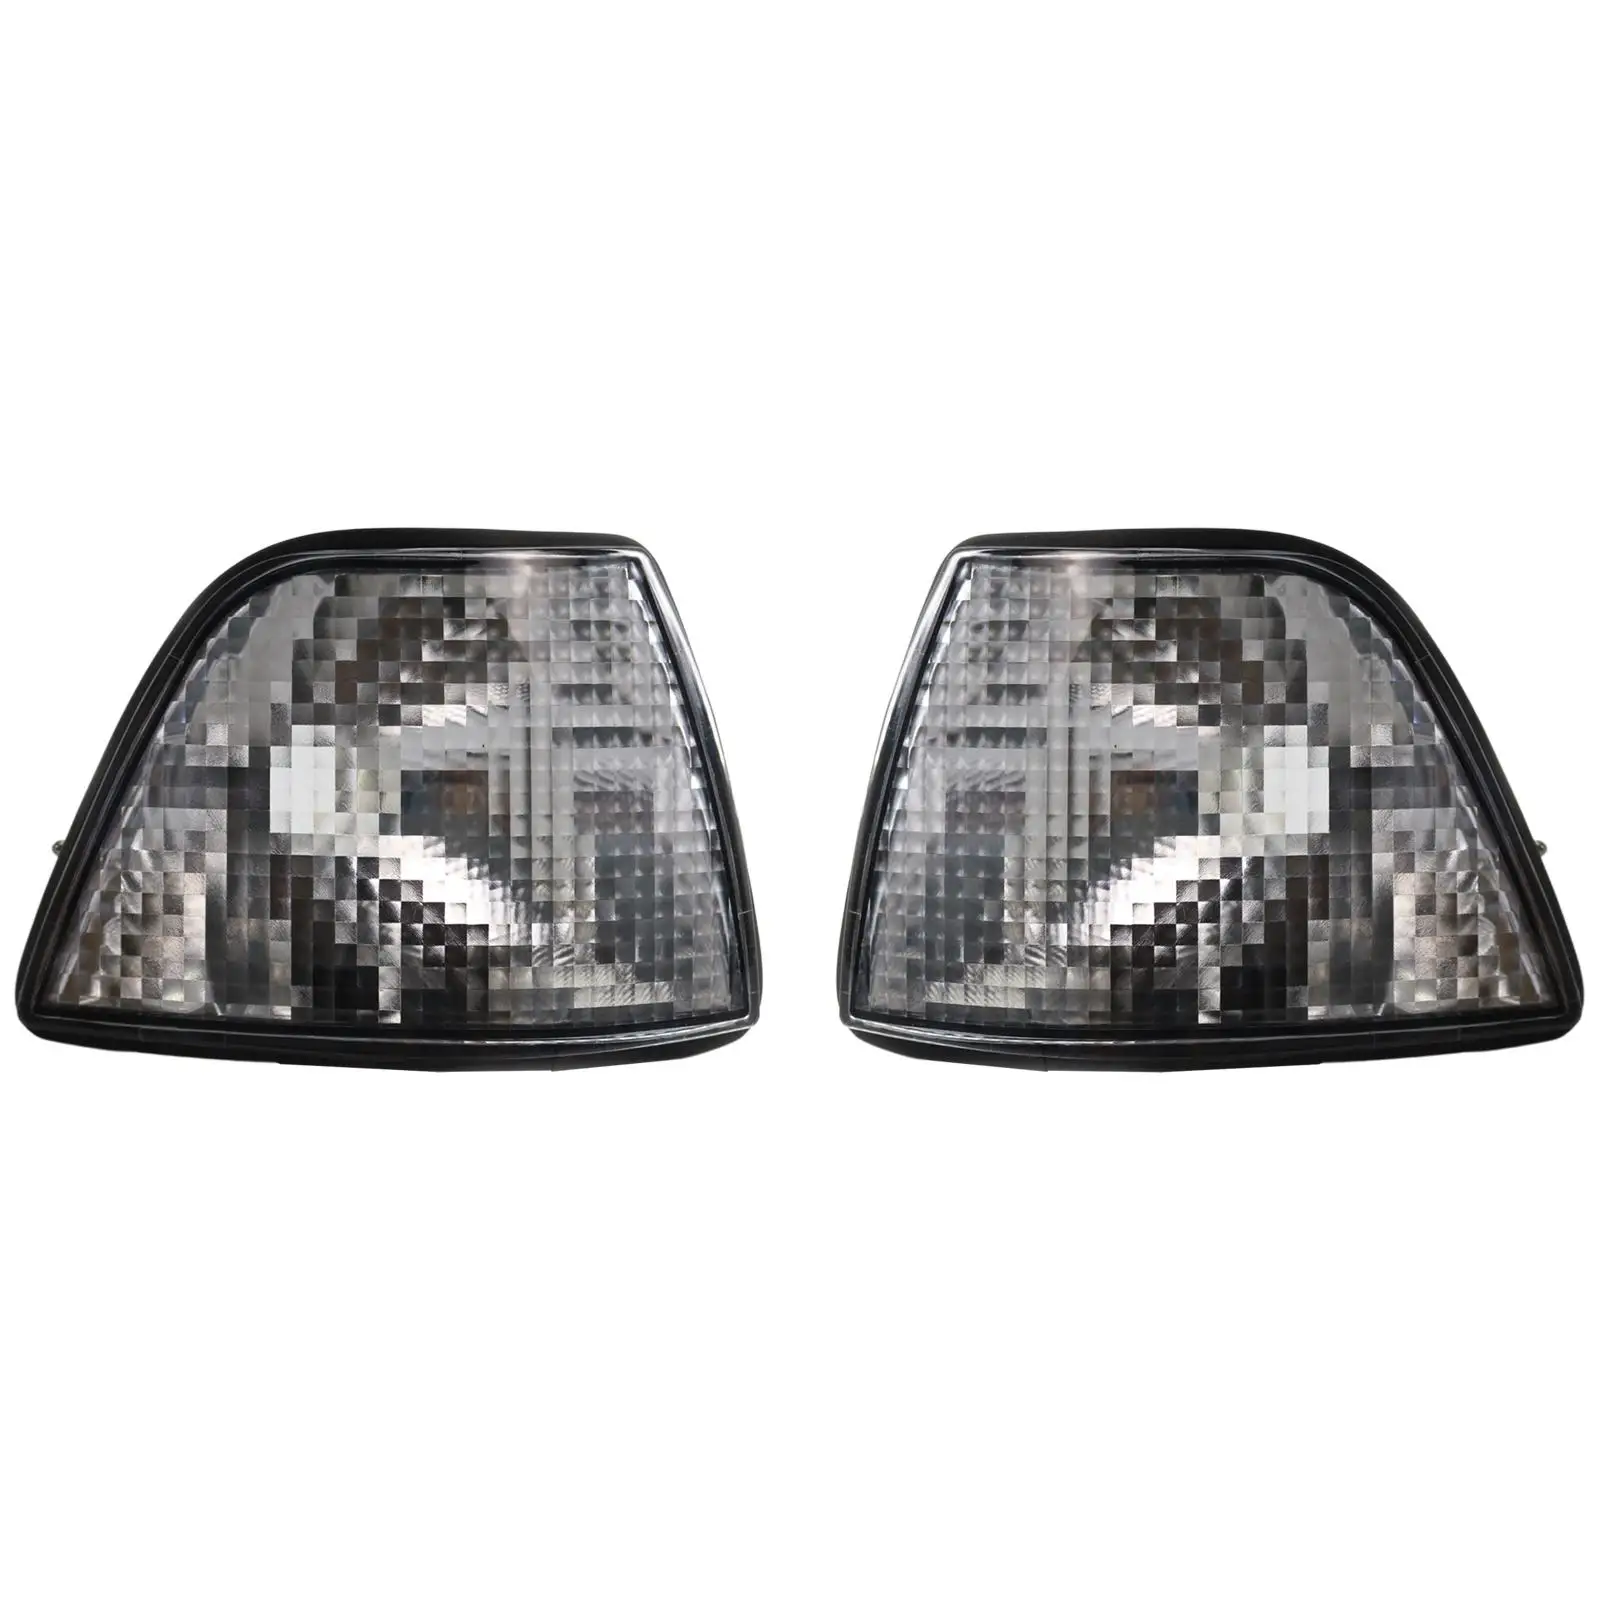 Clear Corner Signal Light 63138353279 Replacement Lamp for bmw E36